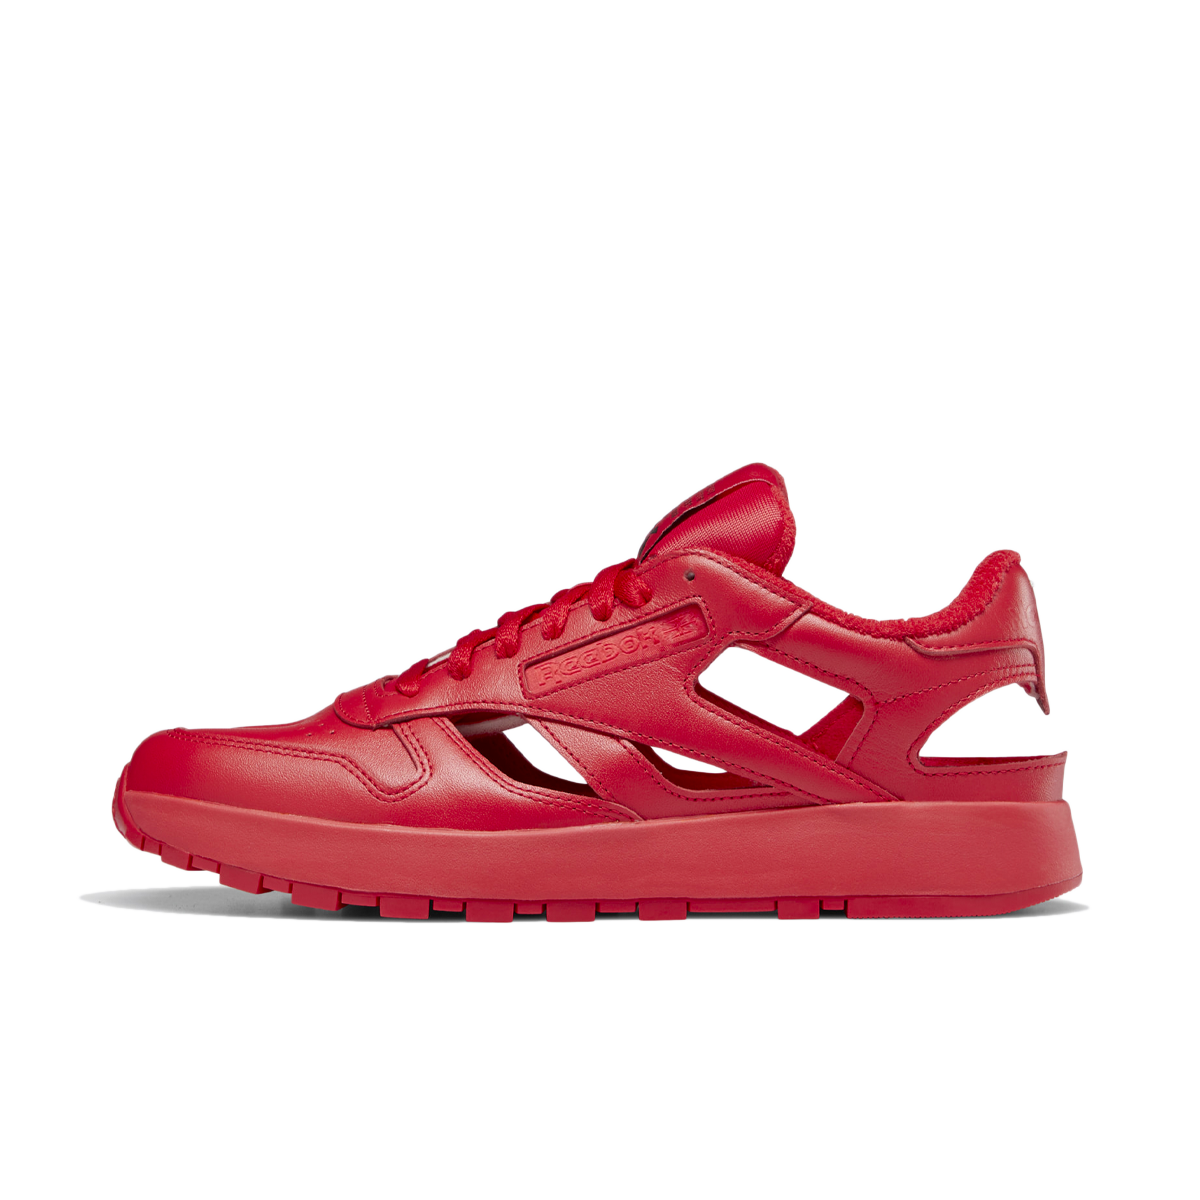 Maison Margiela x Reebok Classic Leather DQ 'Vector Red'